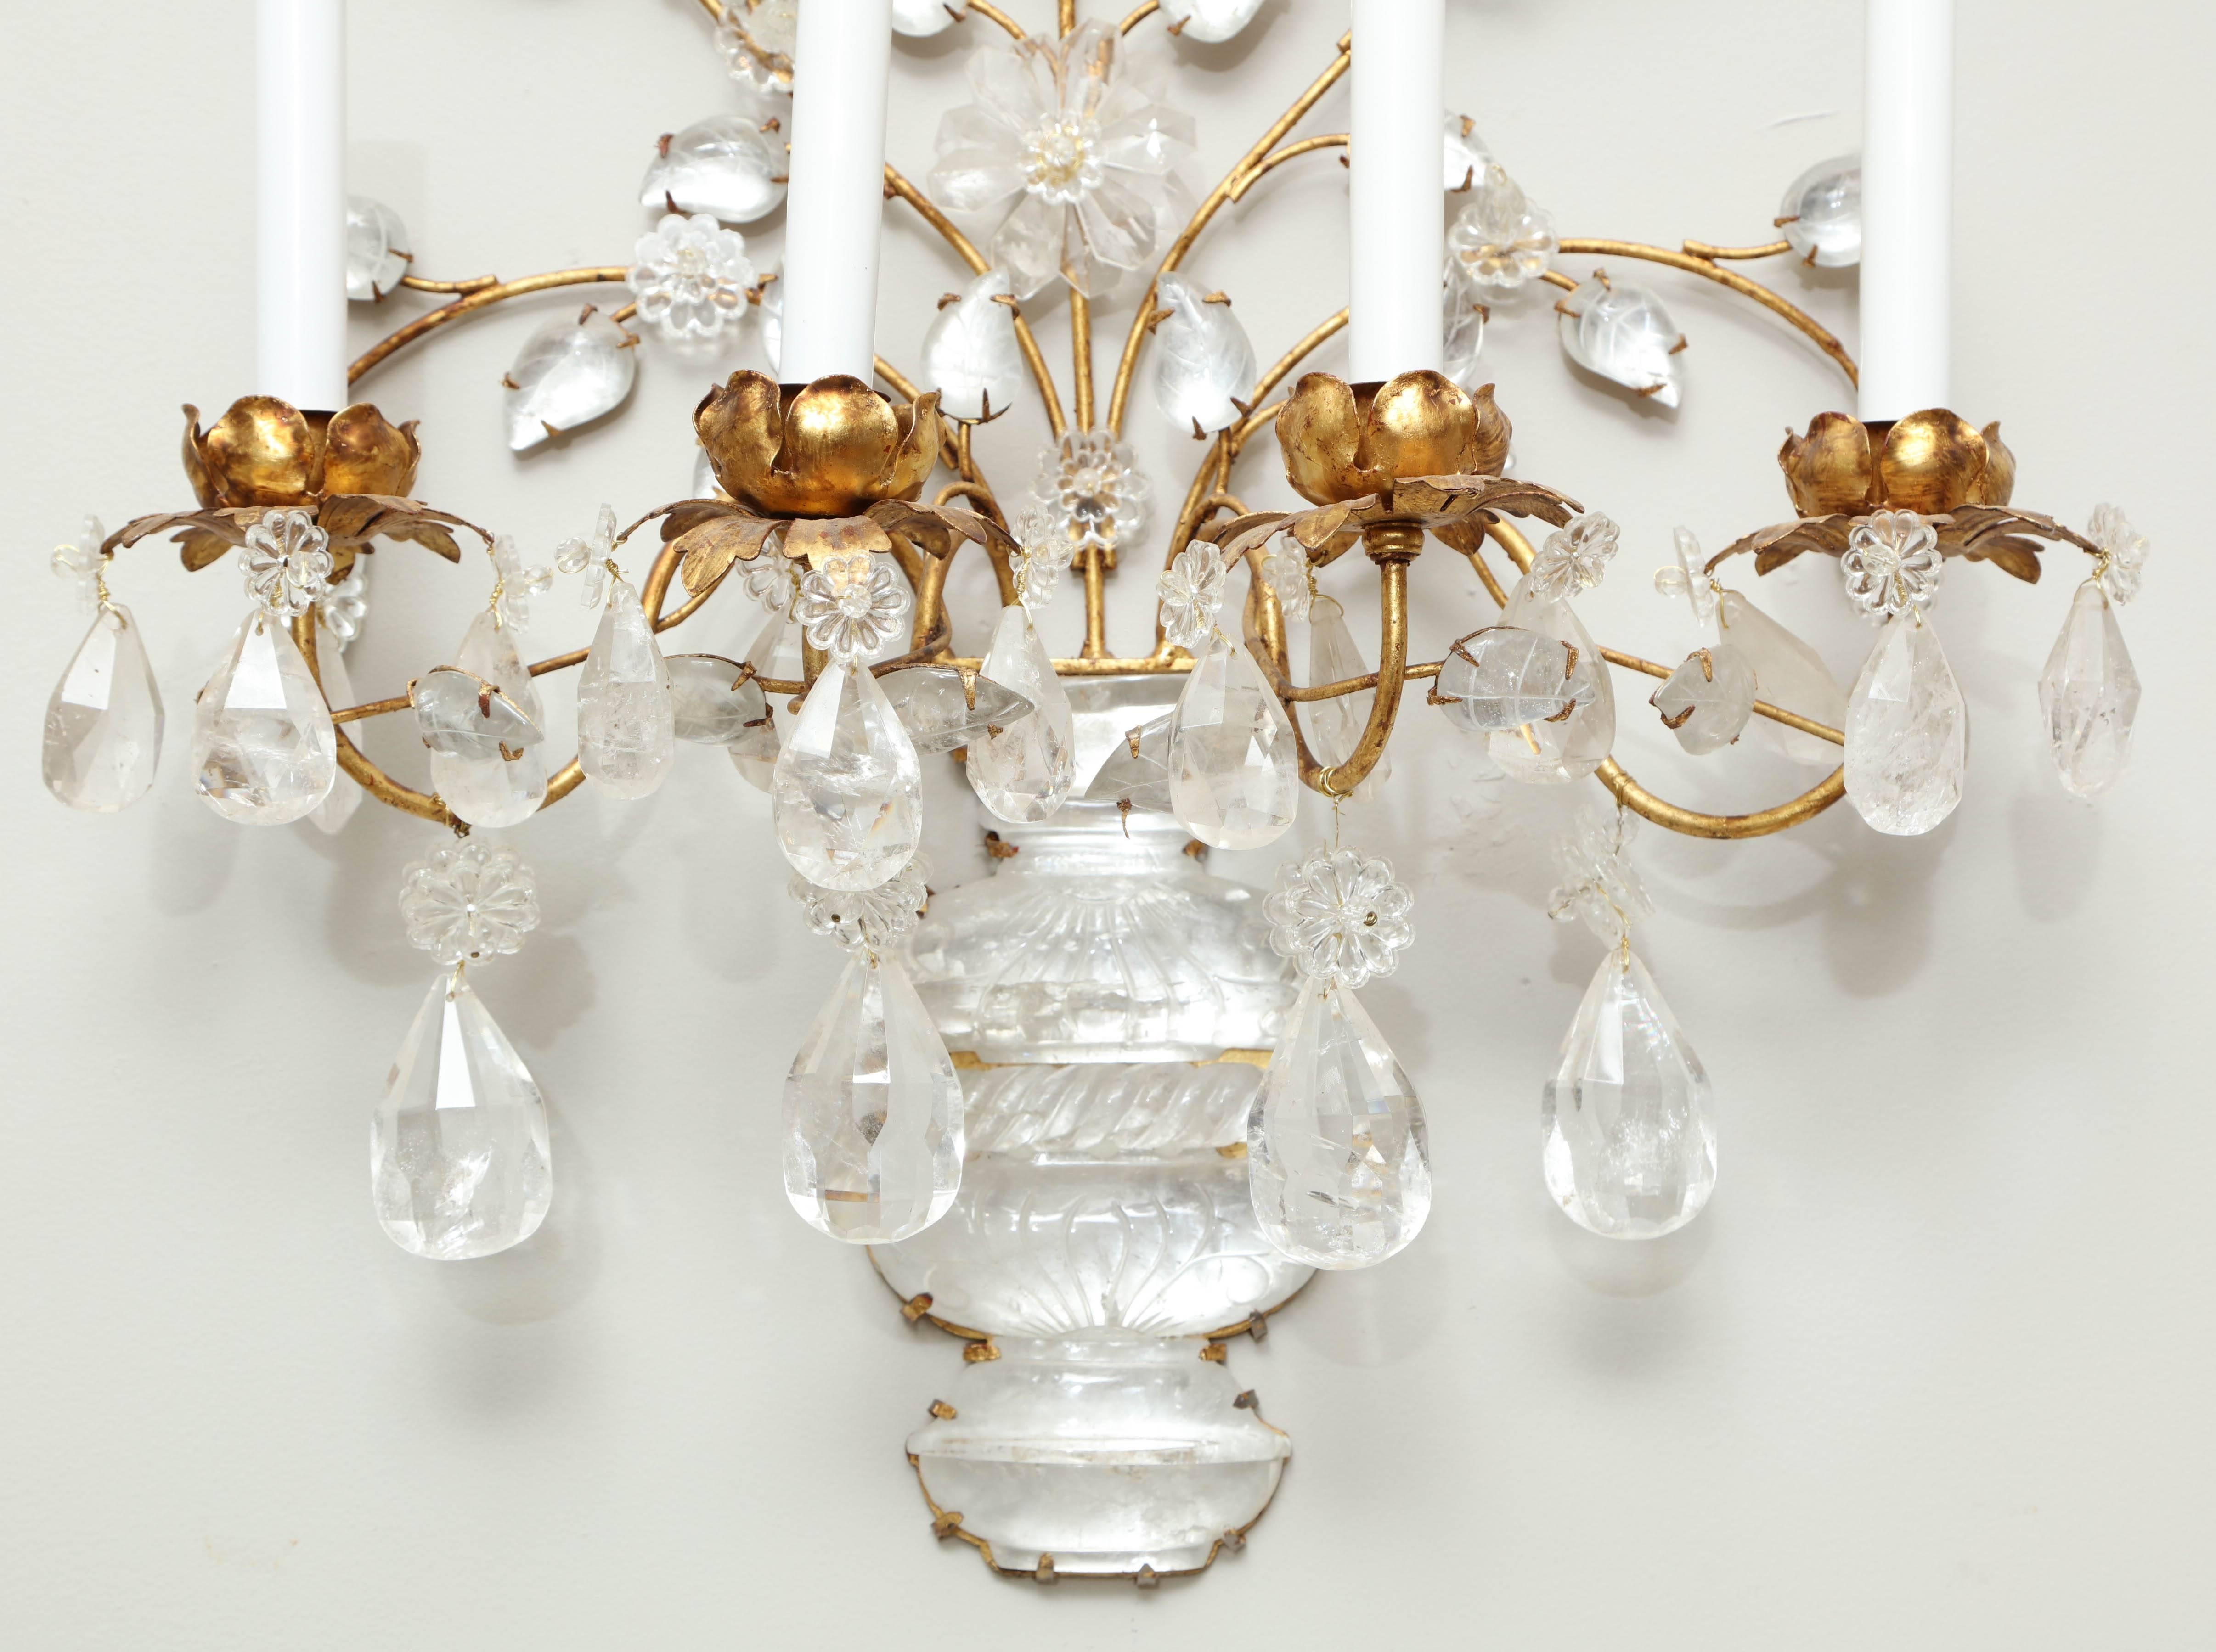 Chinoiserie Pair of Four Light Wall Sconces